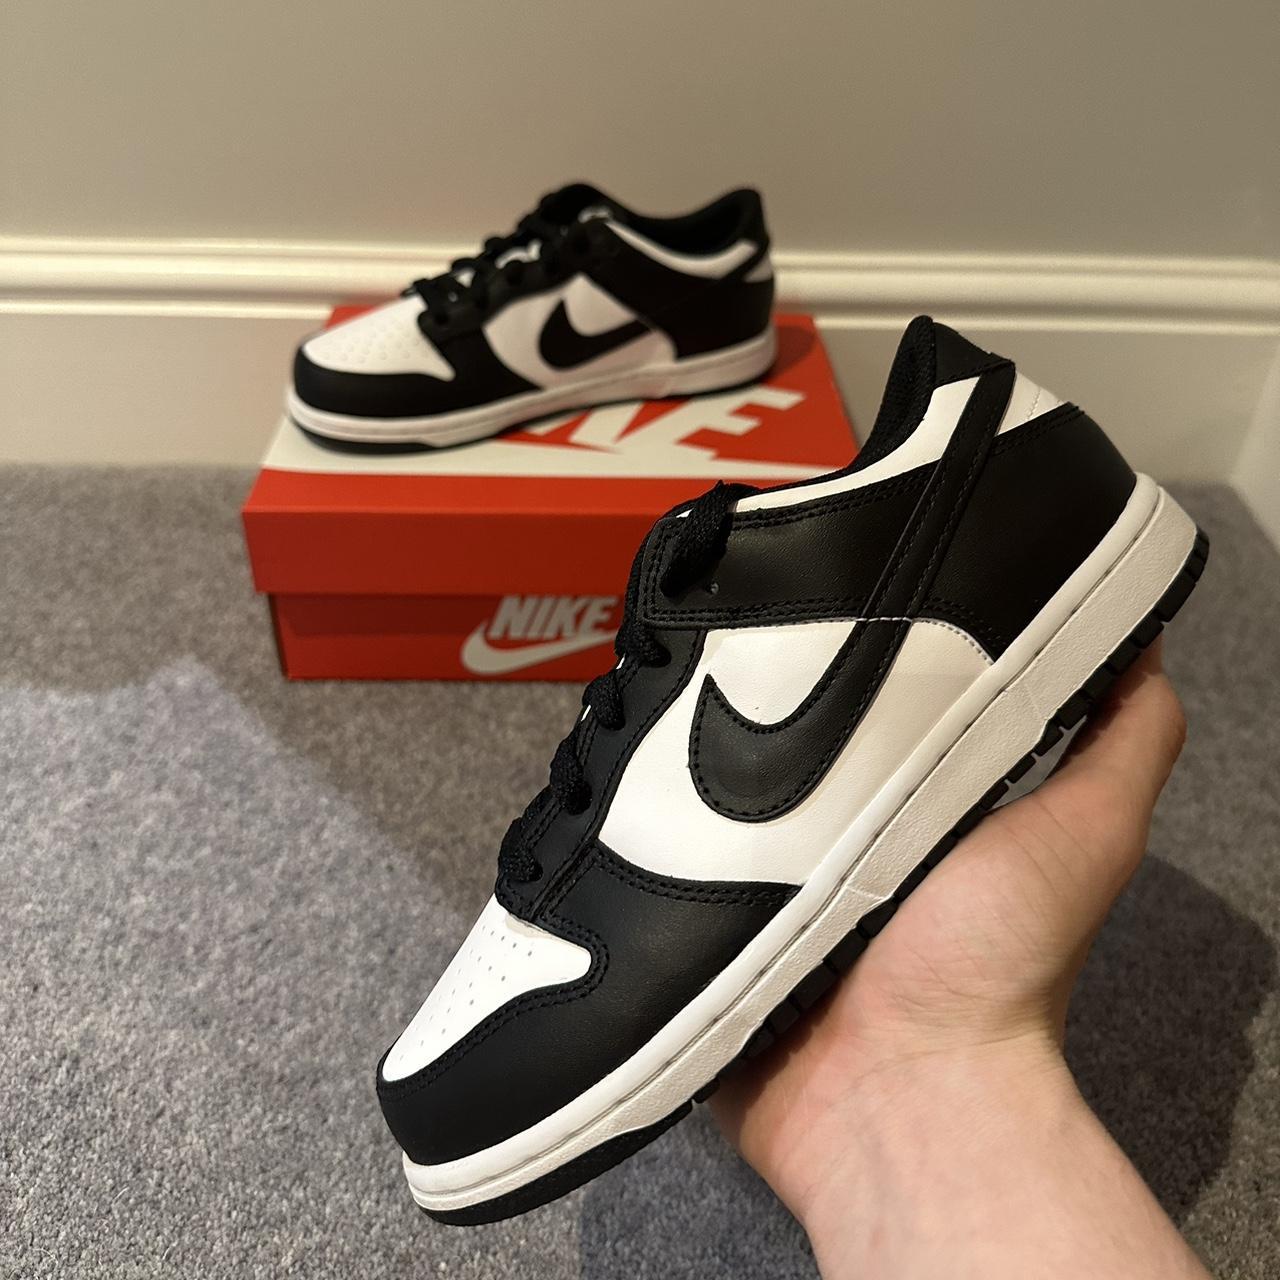 Nike Black and White Trainers | Depop